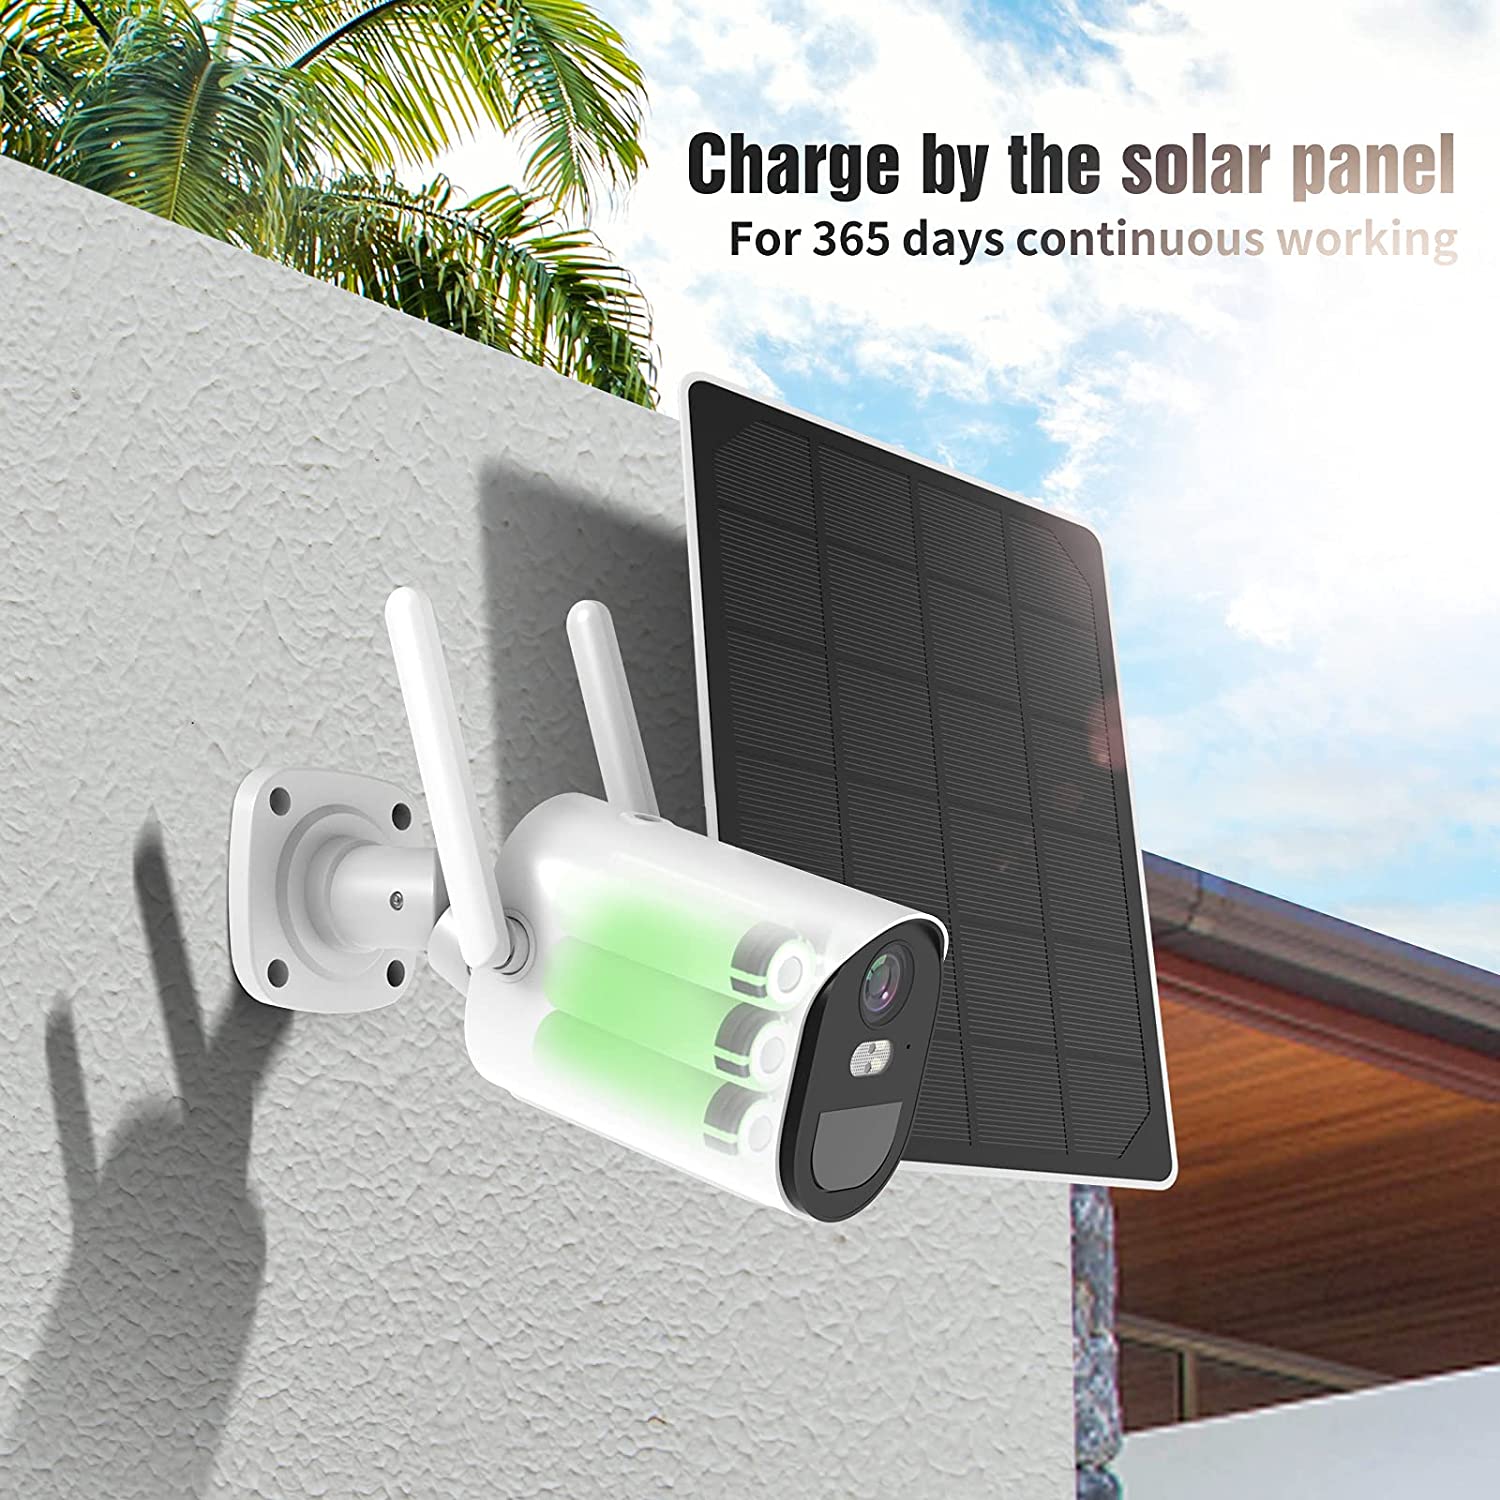 Soliom B10 Solar Security Camera 1080p Outdoor Wireless Wifi Battery Powered, 3M USB cable